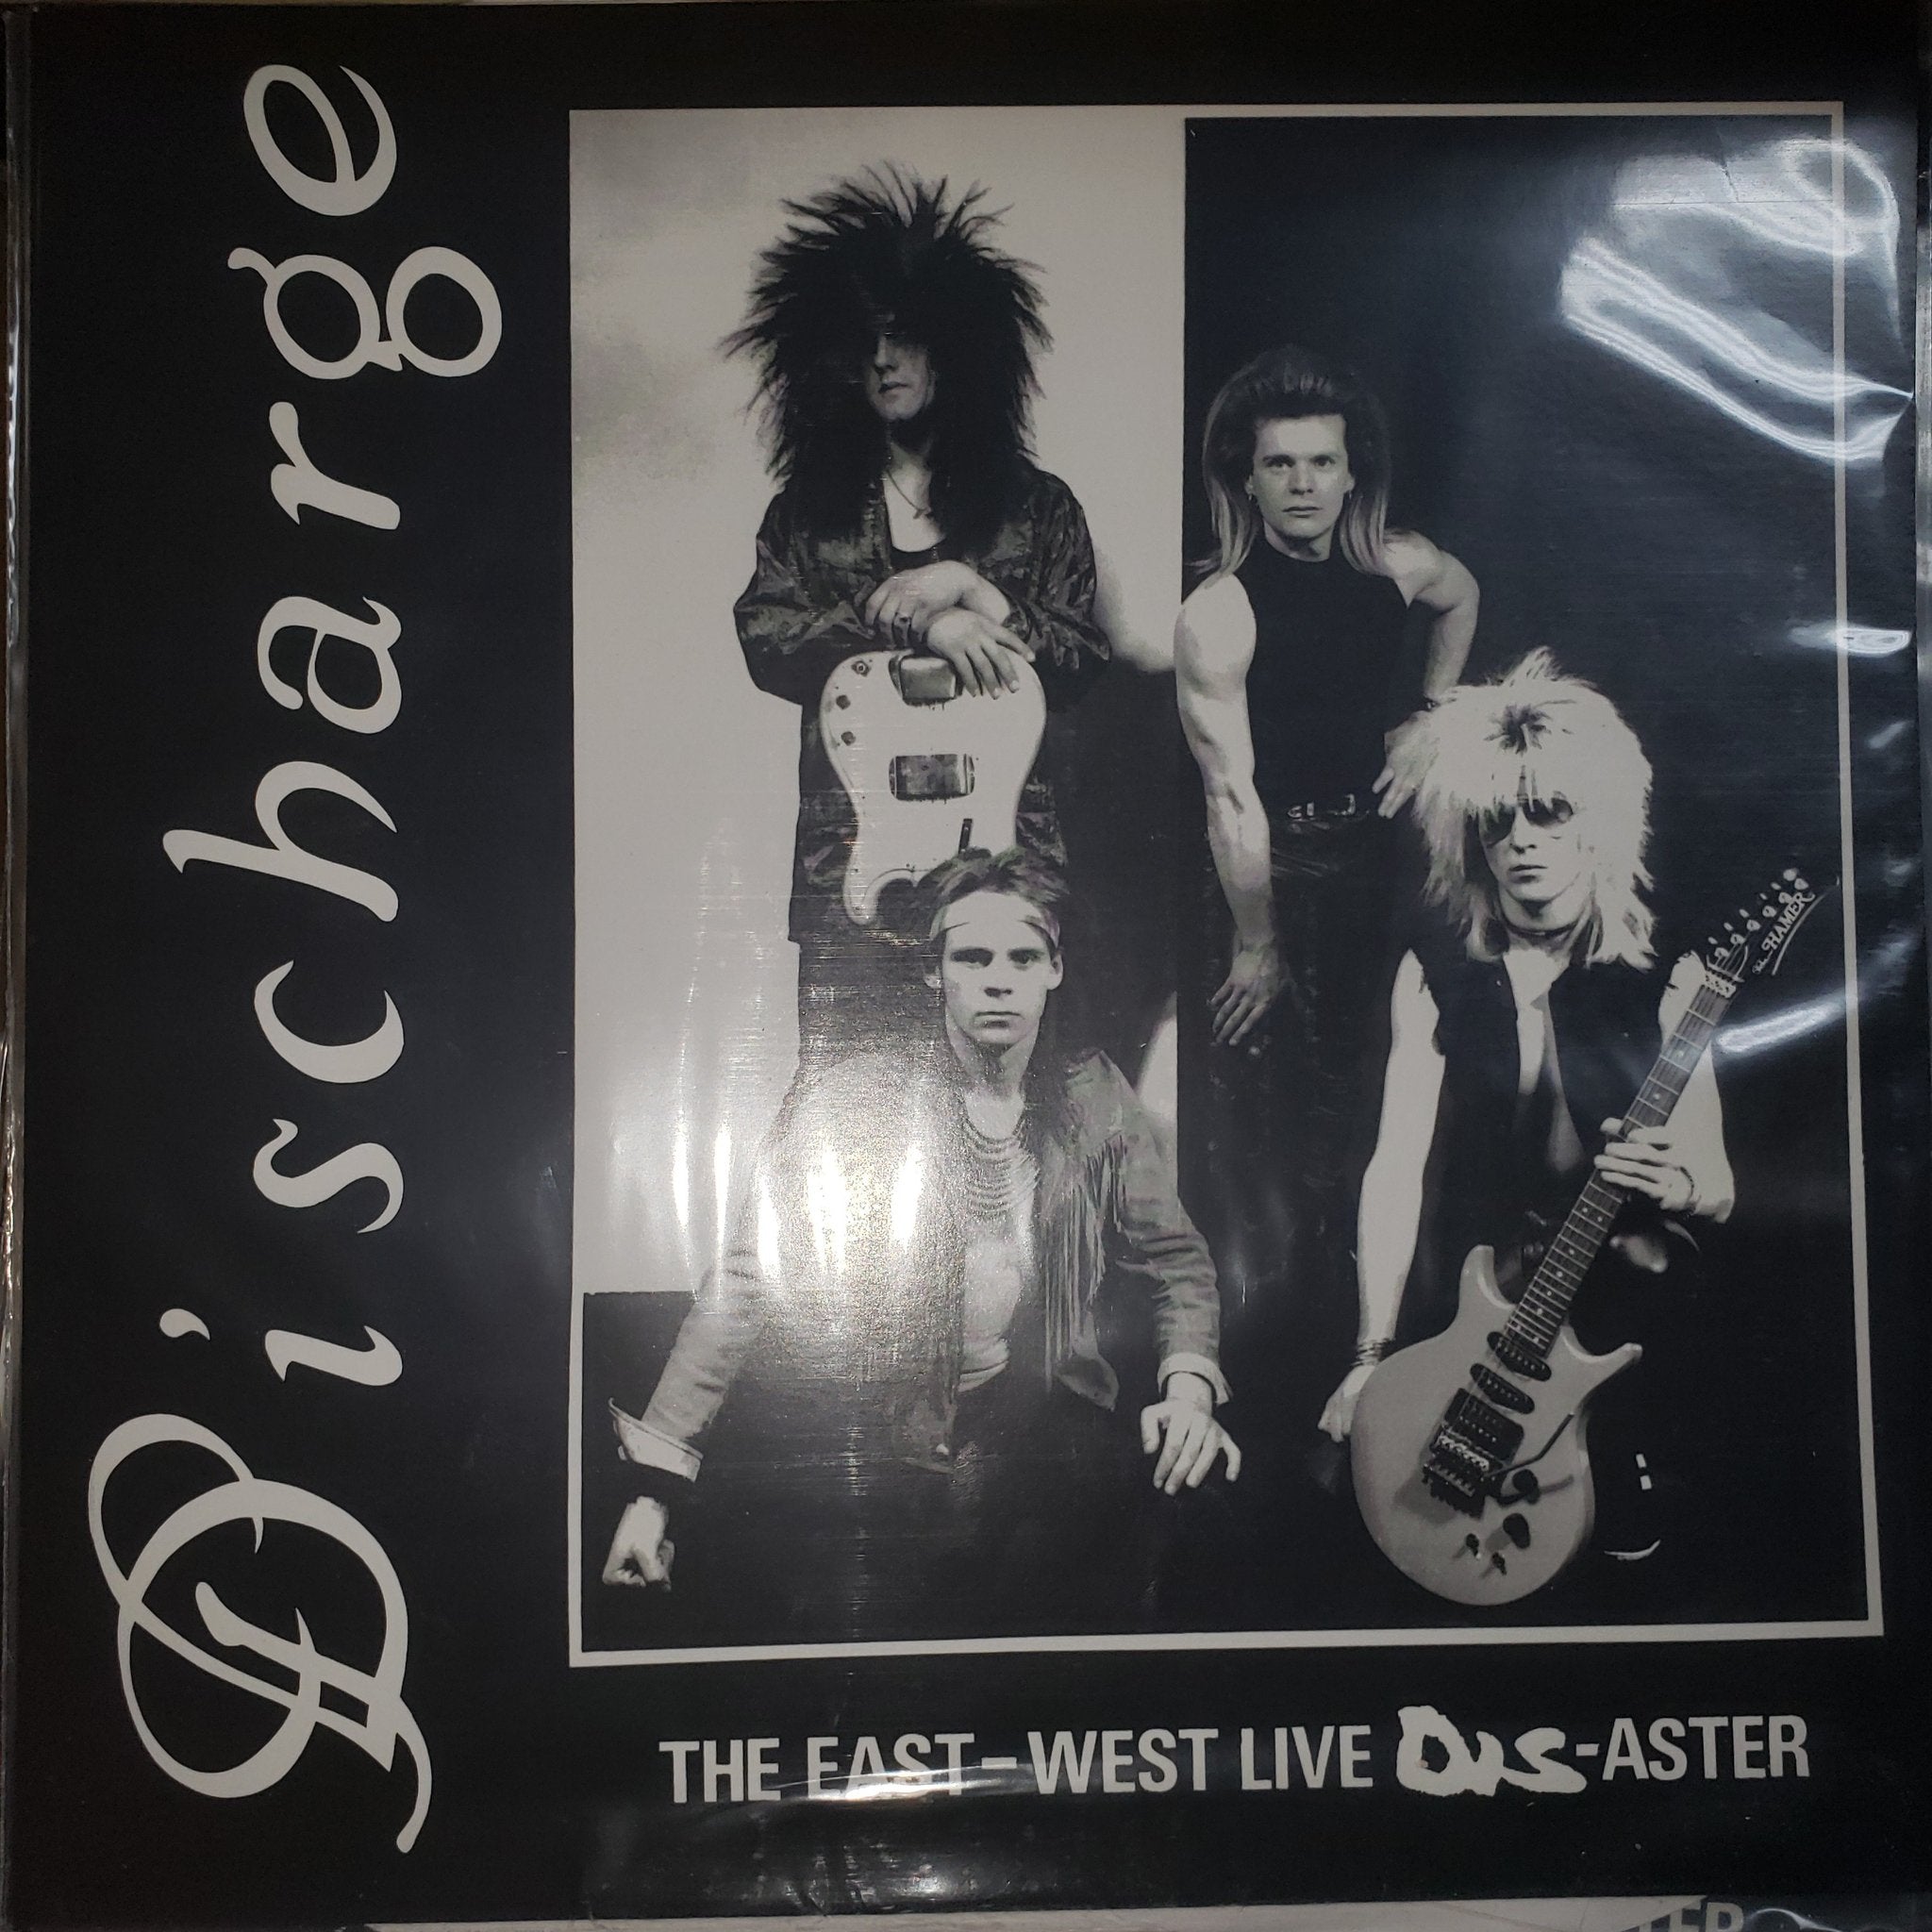 Discharge "The East-West Live Disaster" LP